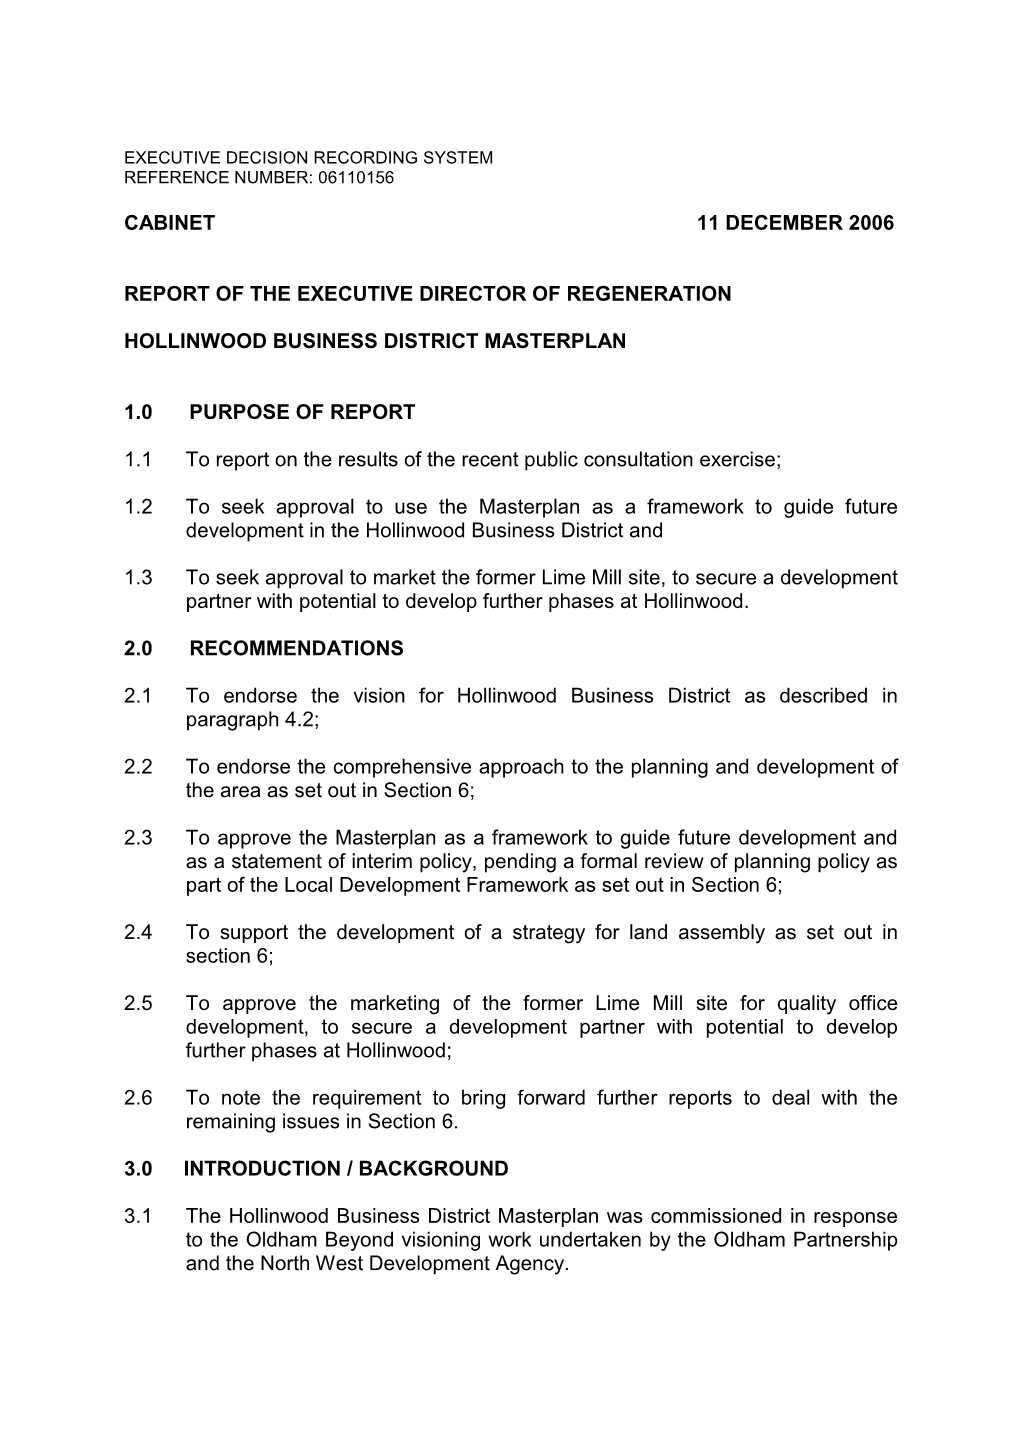 Cabinet 11 December 2006 Report of the Executive